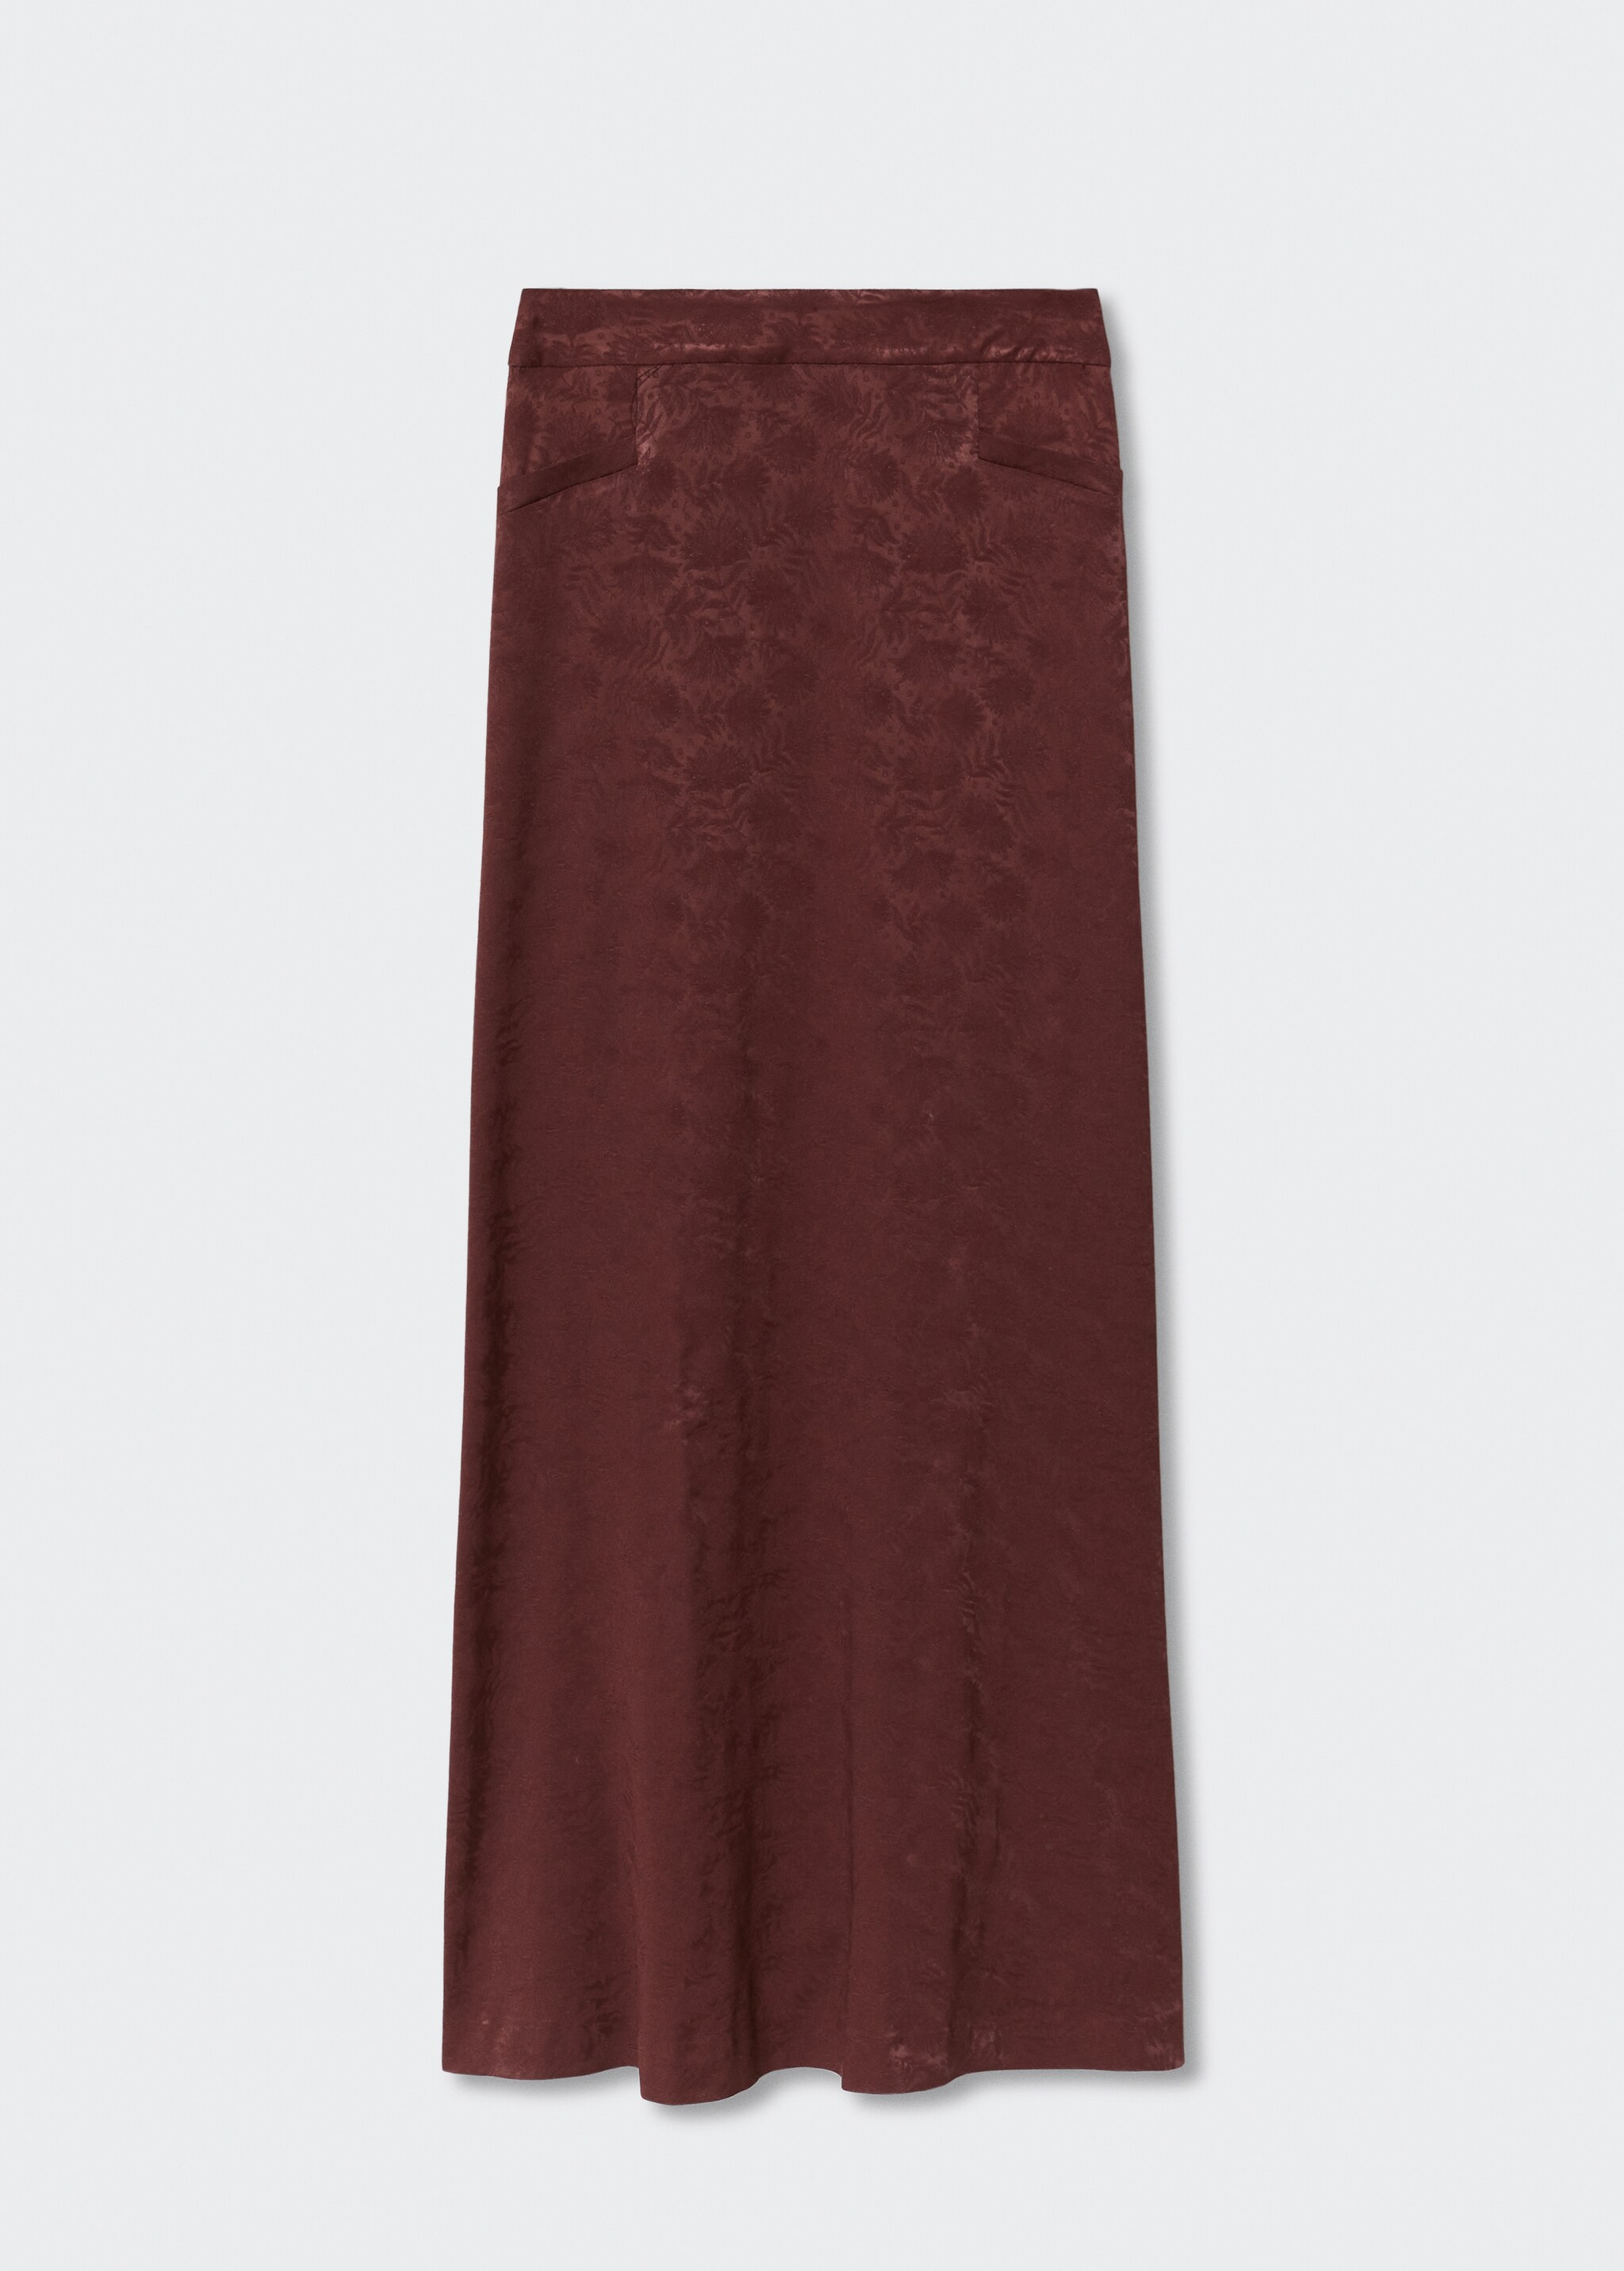 Textured jacquard skirt - Article without model